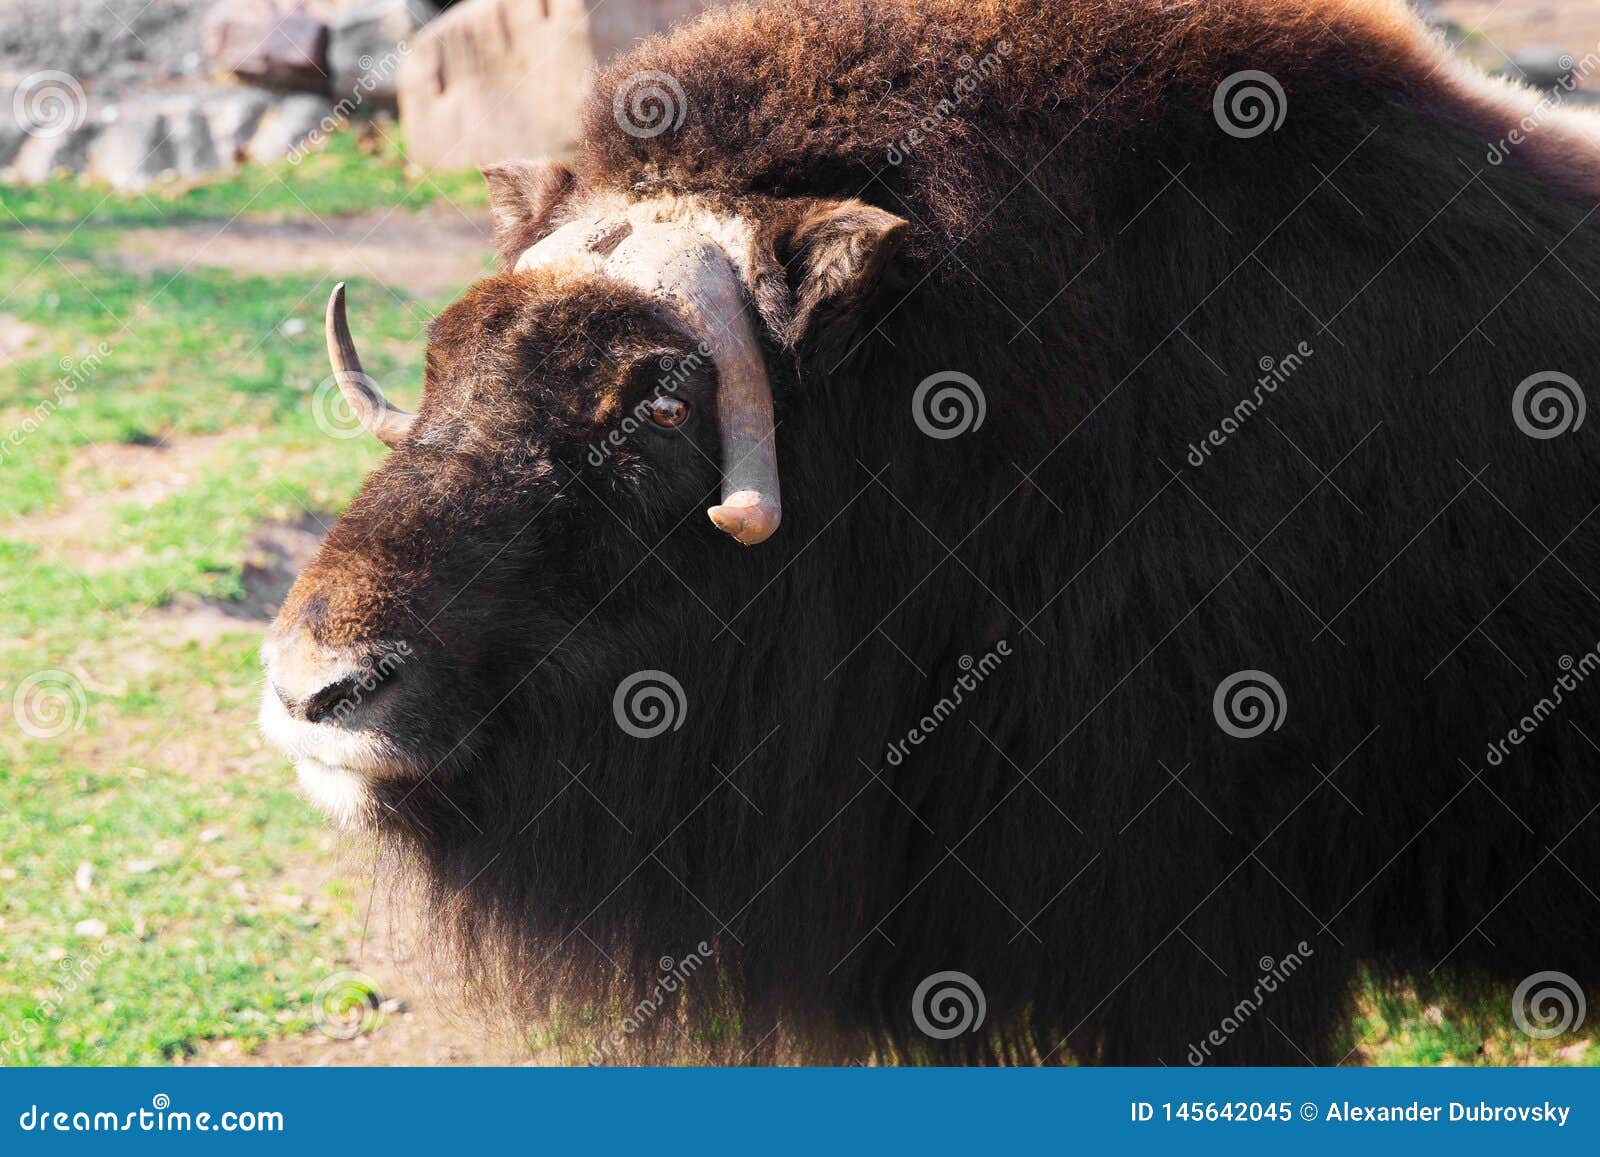 Wild Musk Ox in the Nature. Wildlife of Big Animals Stock Image - Image of  oxen, outdoors: 145642045